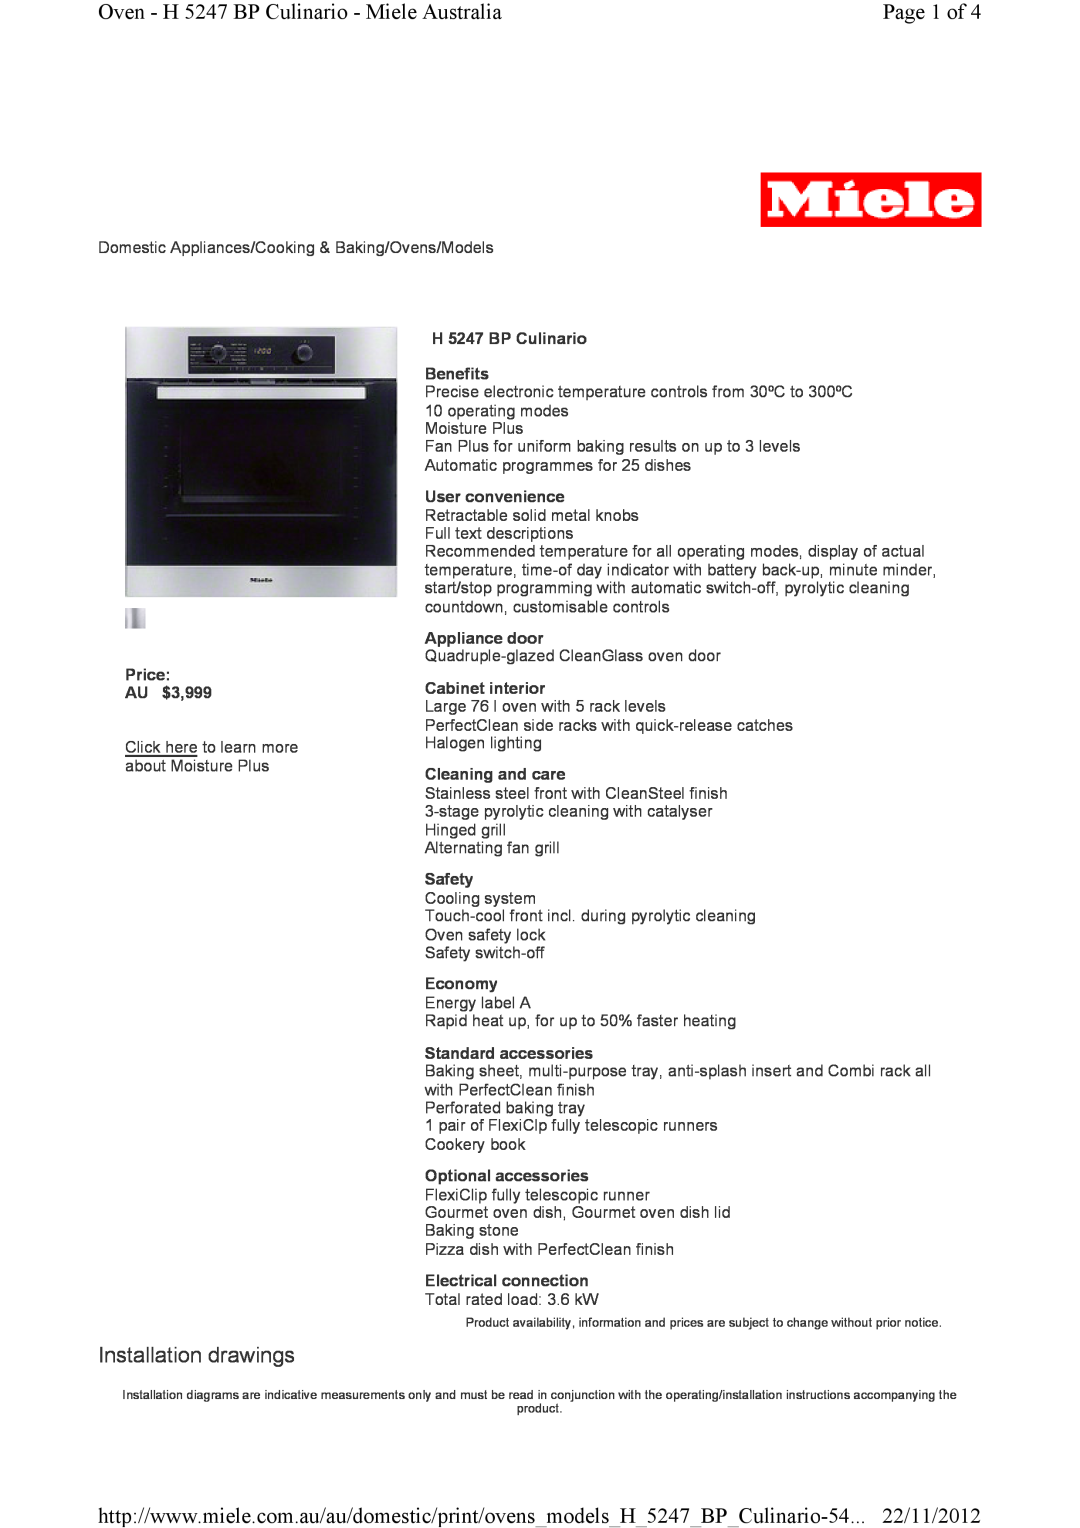 Miele installation instructions Oven - H 5247 BP Culinario - Miele Australia, Page 1 of, Installation drawings 